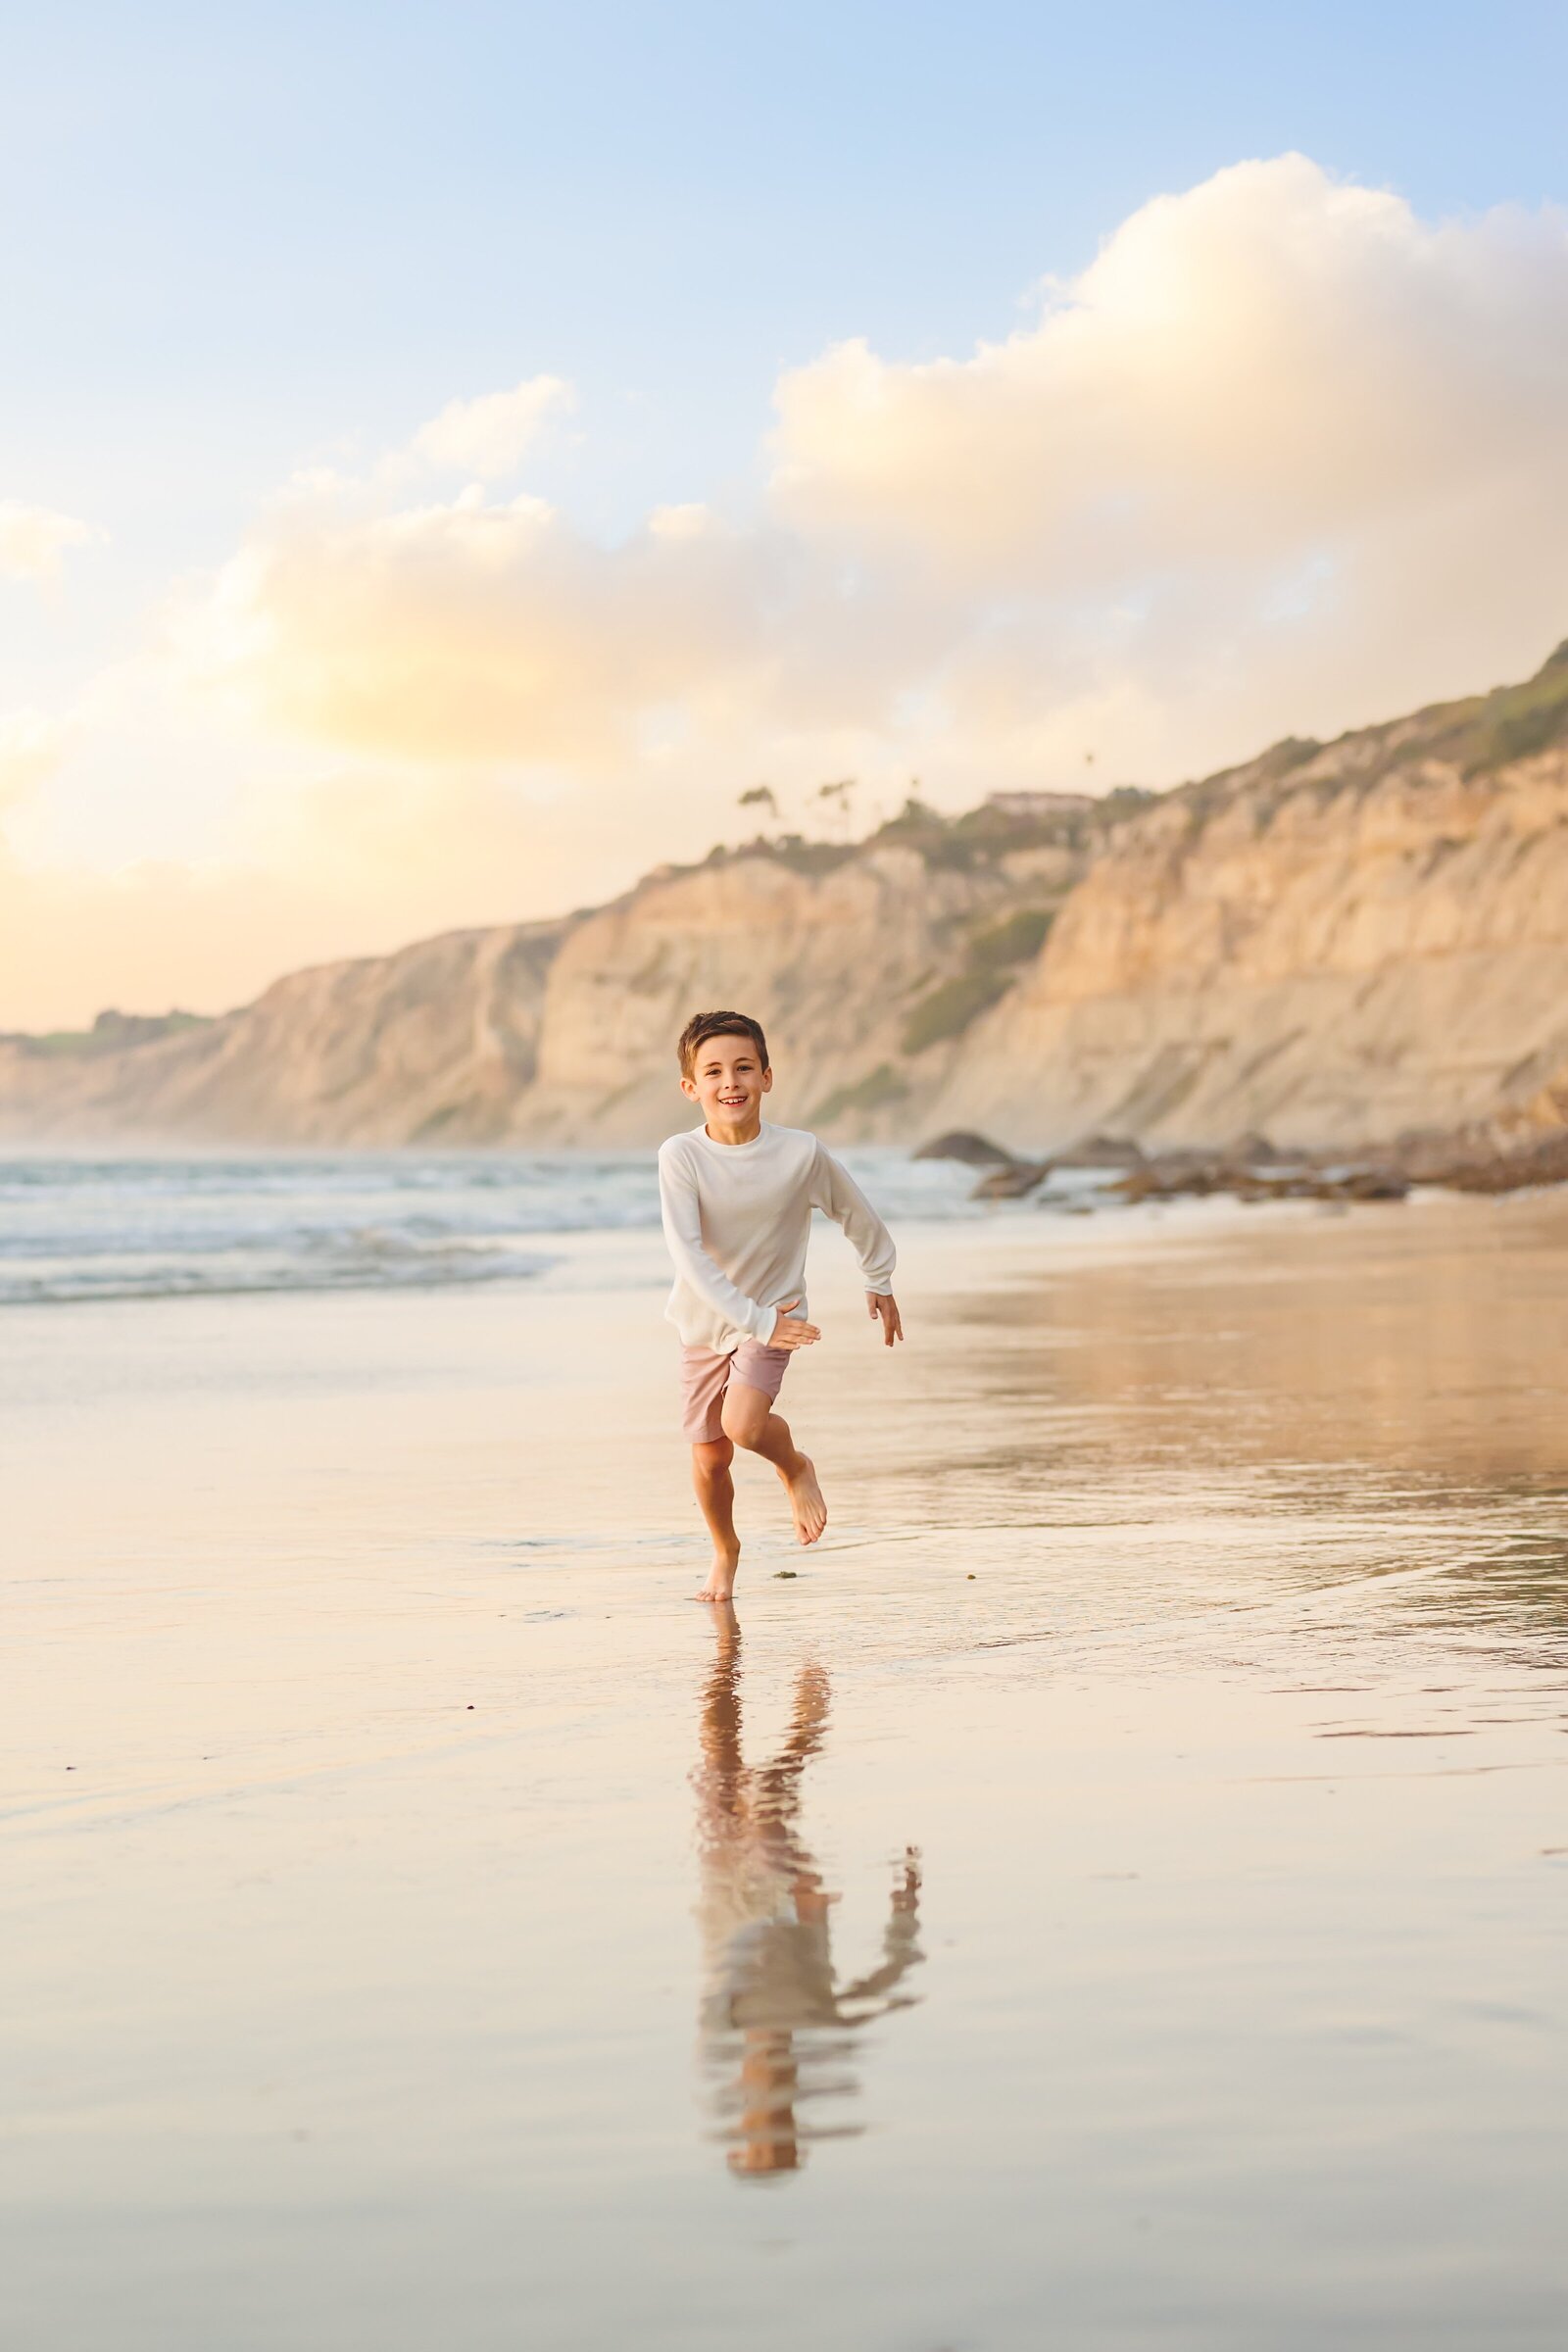 Young boy running on a San Diego beach with his reflection showing on the wet sand